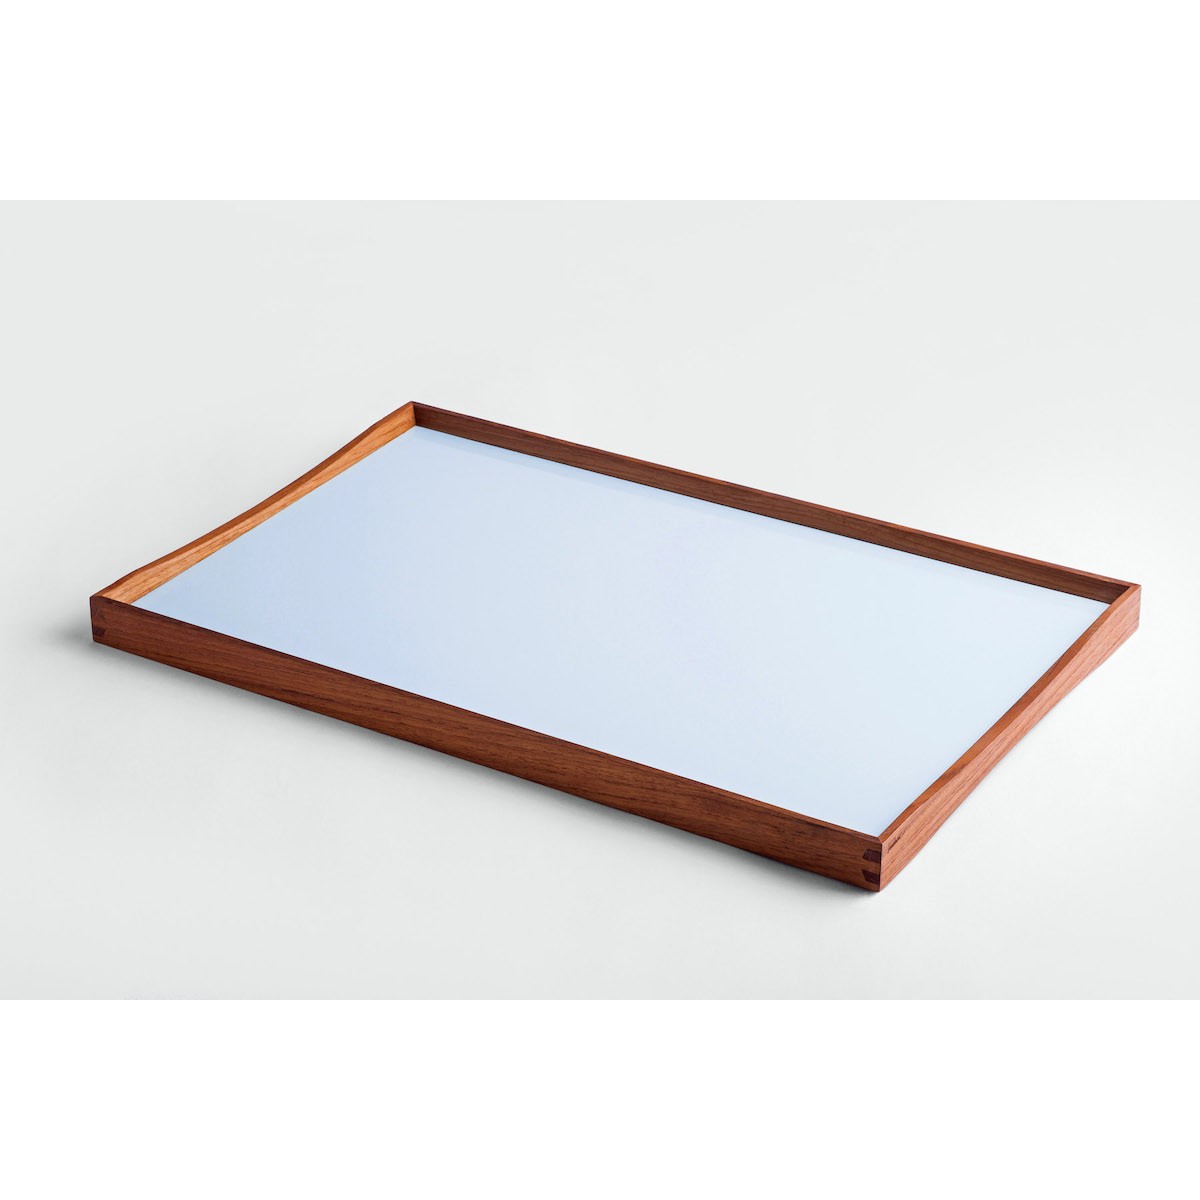 30 x 48 cm – Turning tray – blue and black - M